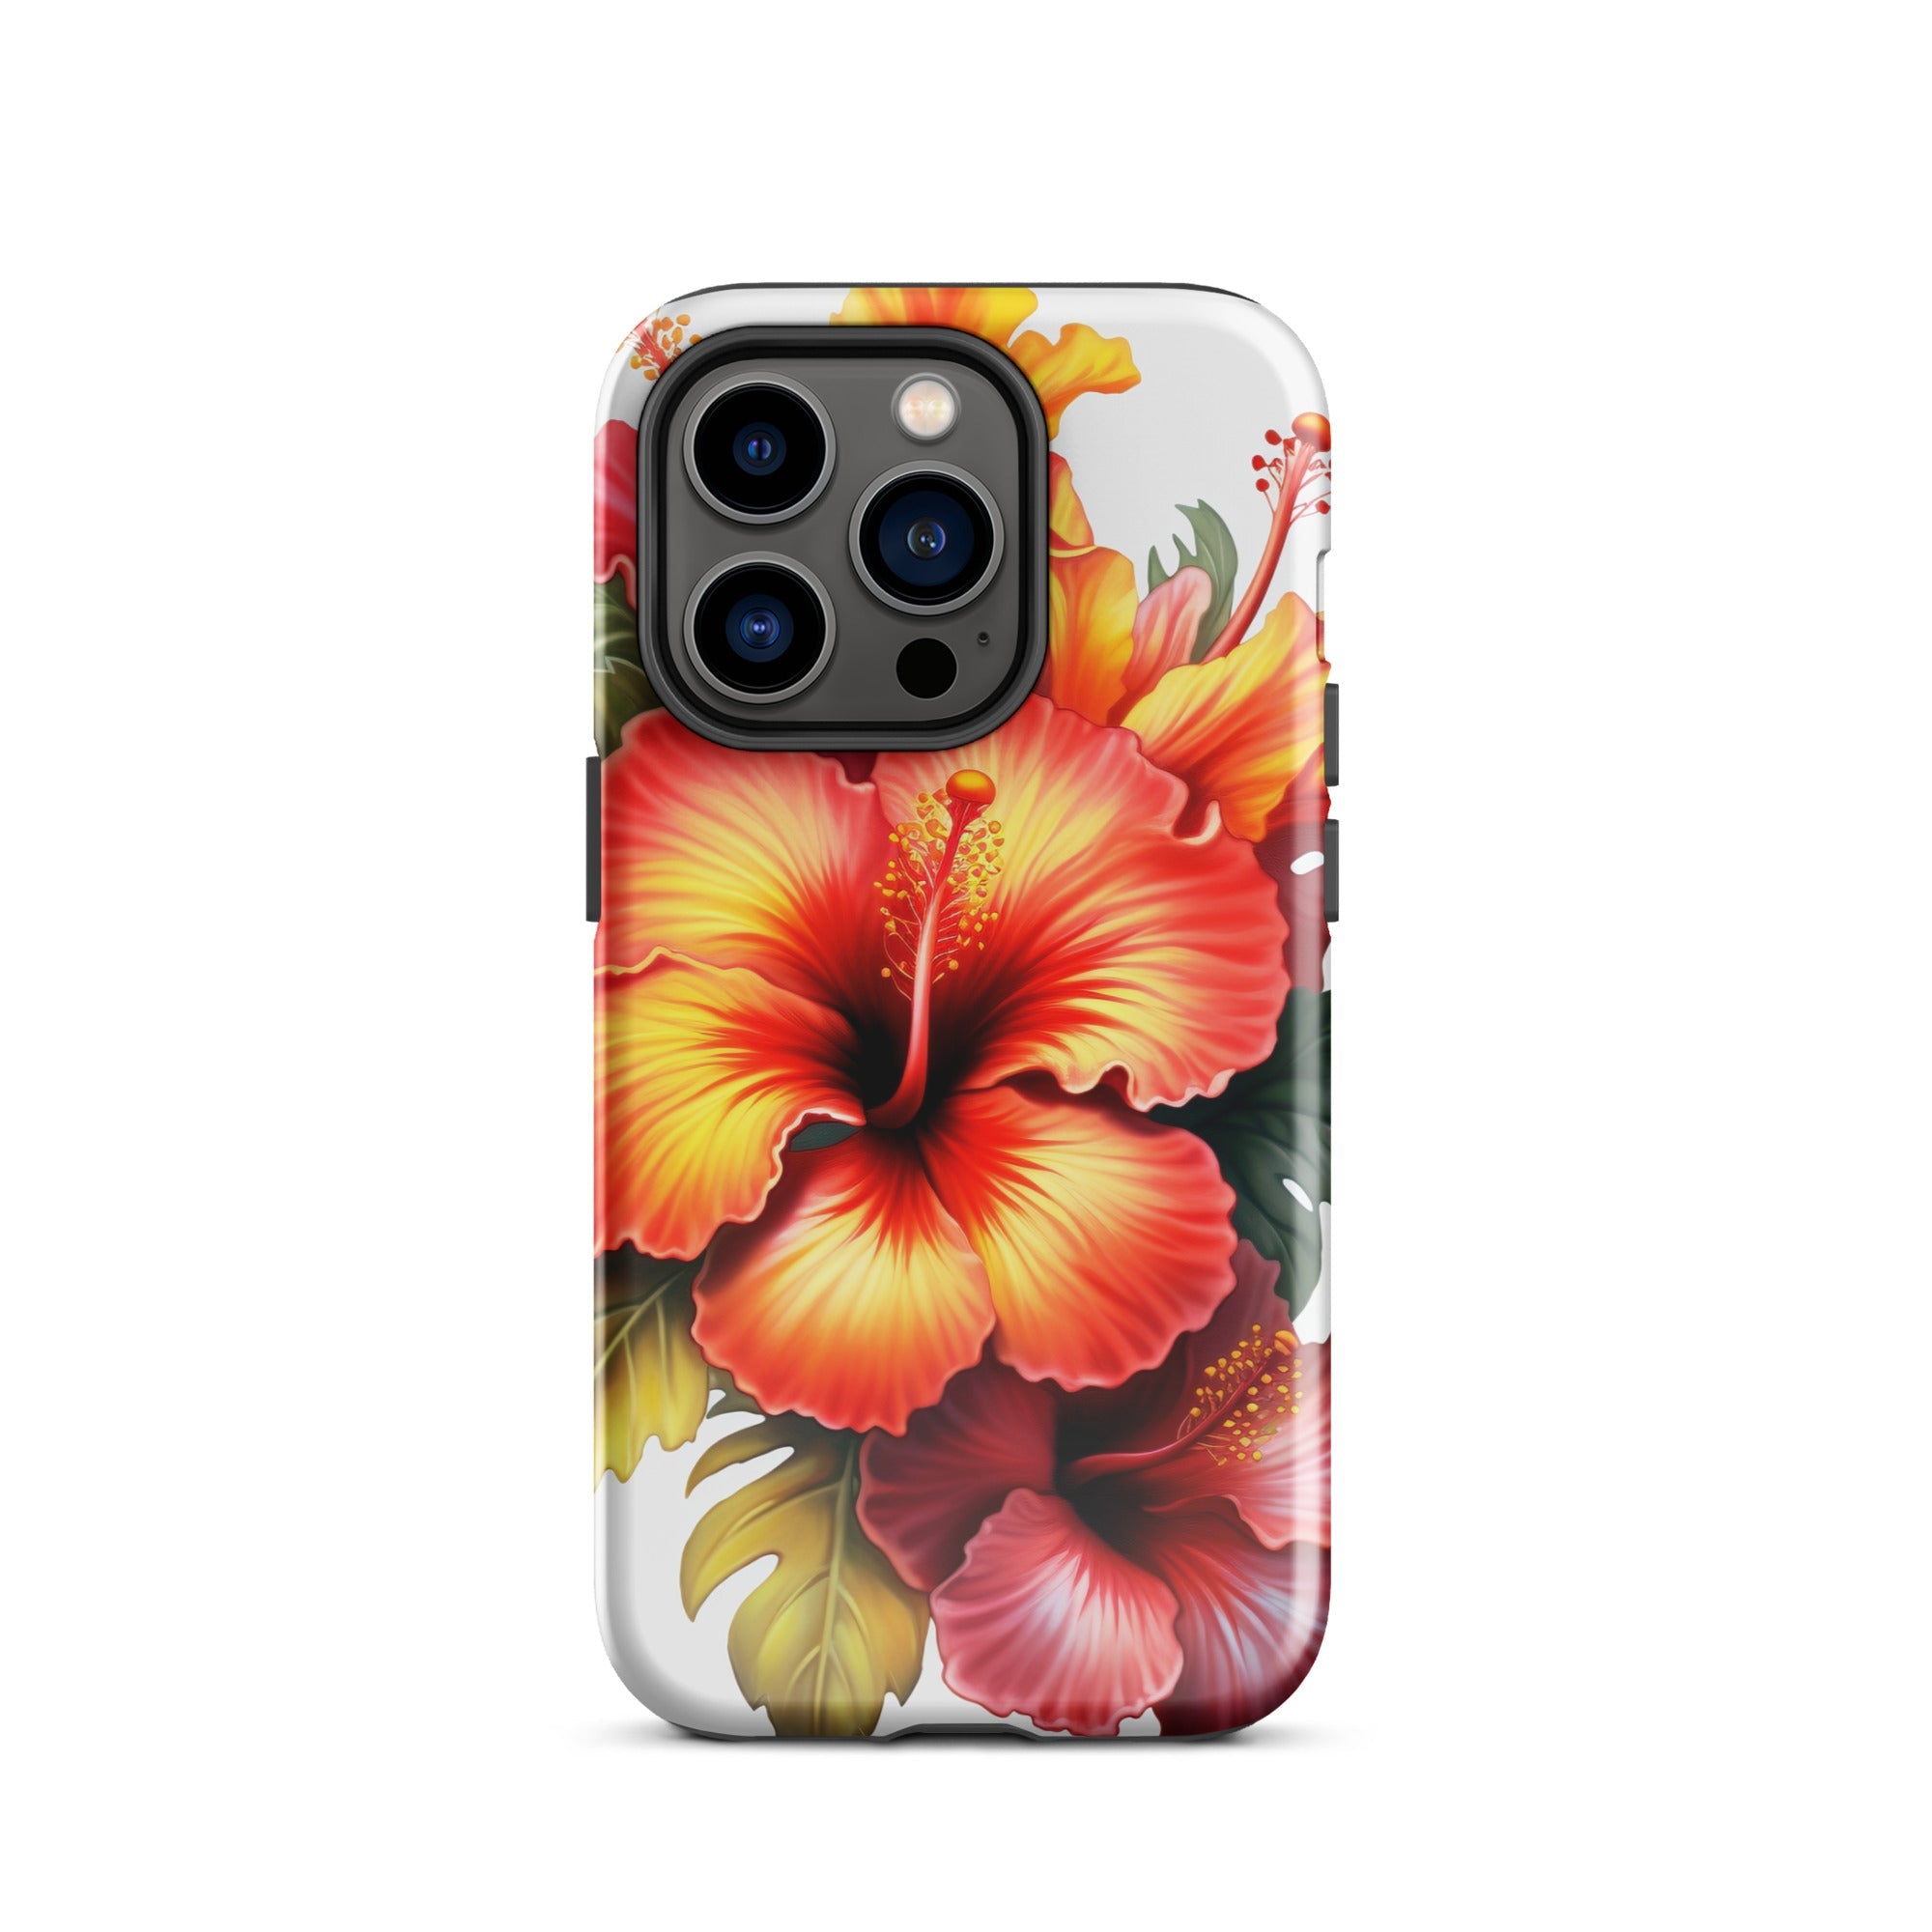 Hibiscus Flower iPhone Case by Visual Verse - Image 27